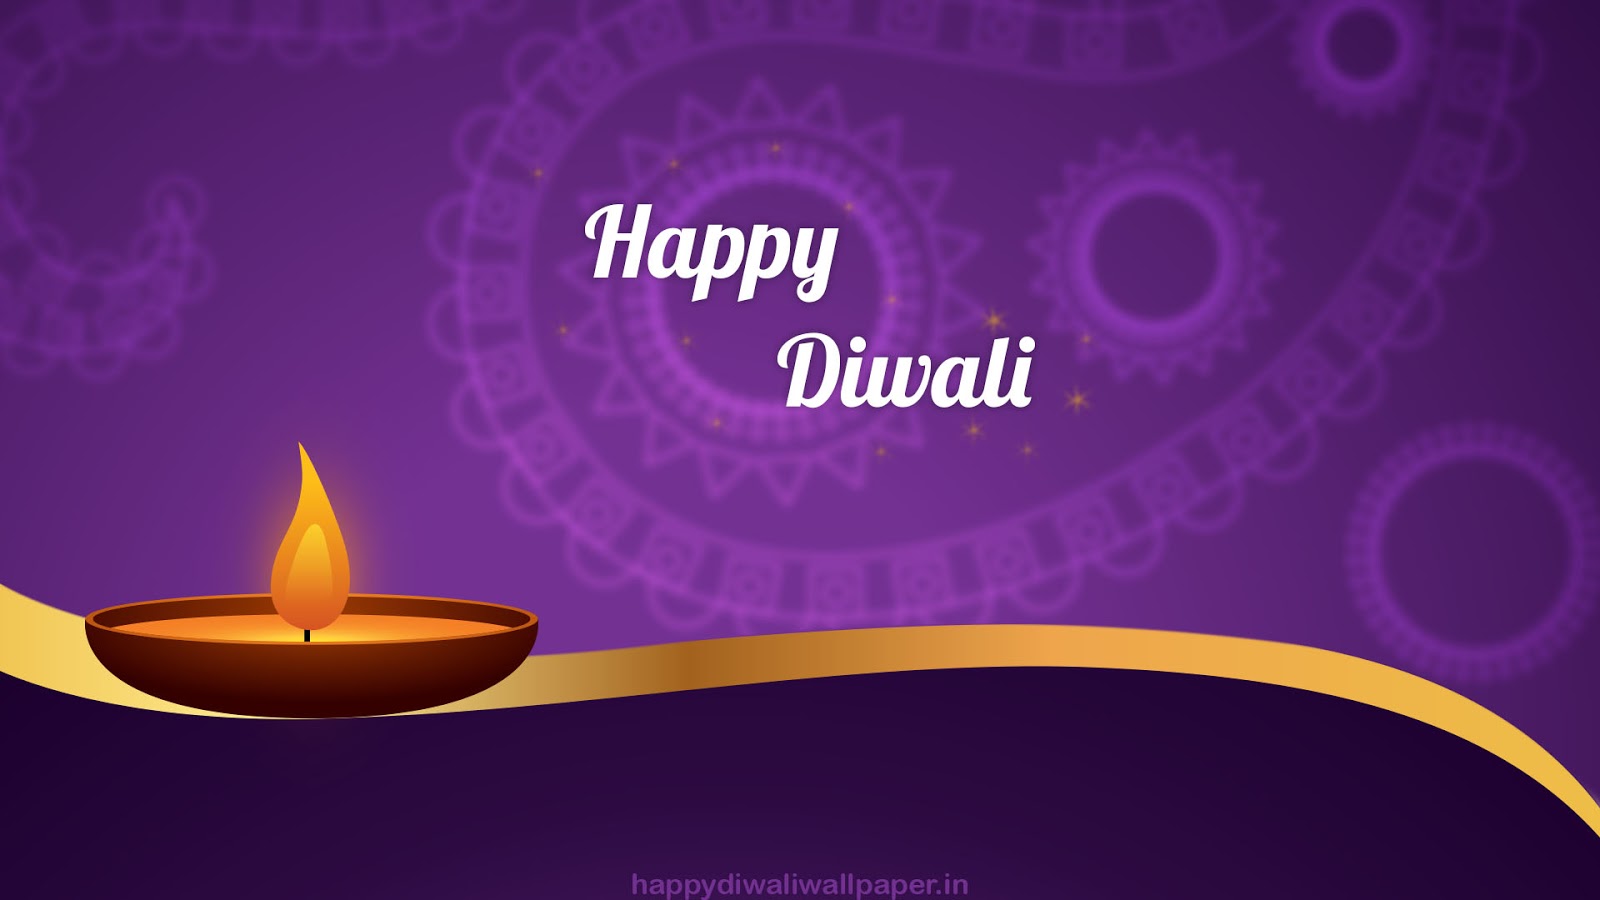 Diwali Wallpaper 2017 - Happy Birthday Cards To Print , HD Wallpaper & Backgrounds